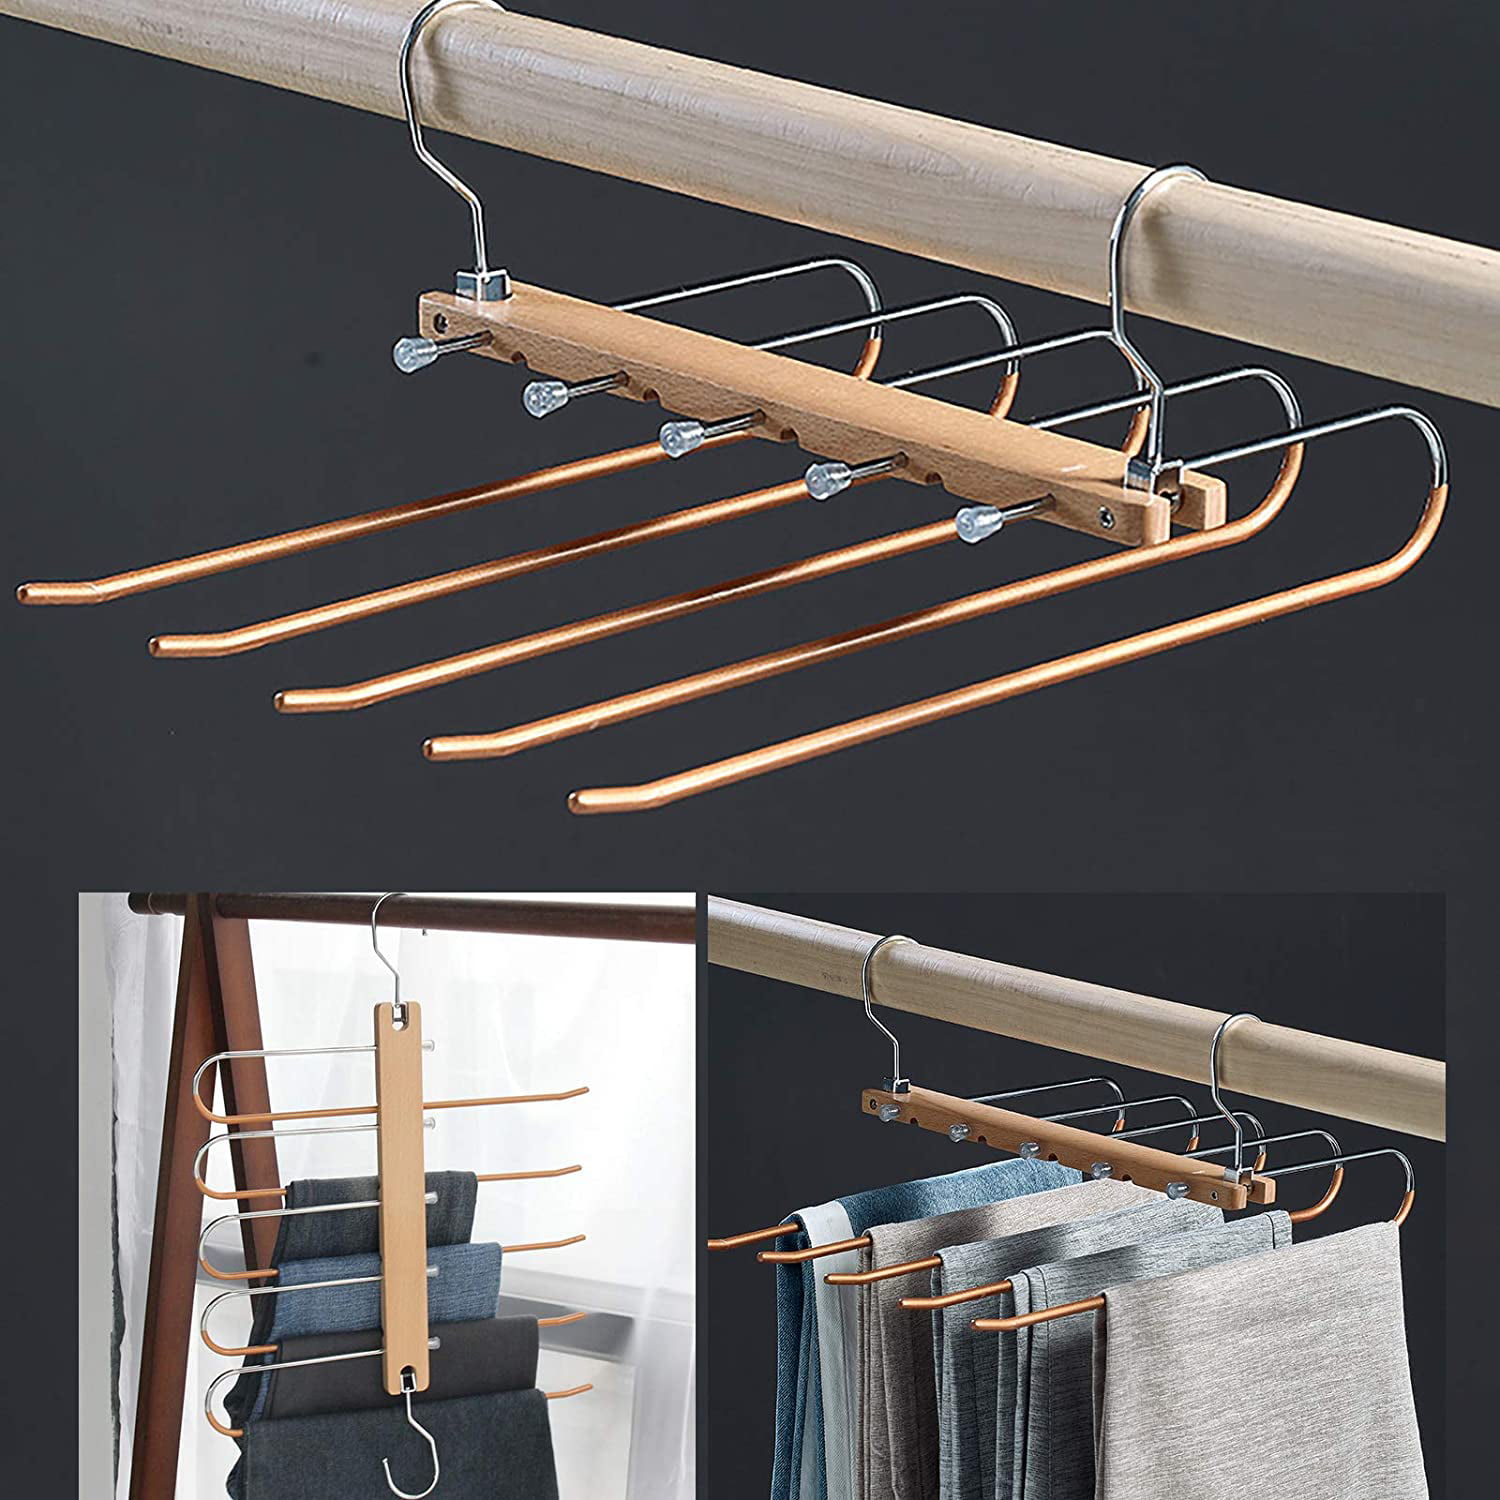 Details about  / Multi-function Trousers Hanger Stainless Steel Clothes Storage for Pants Jeans